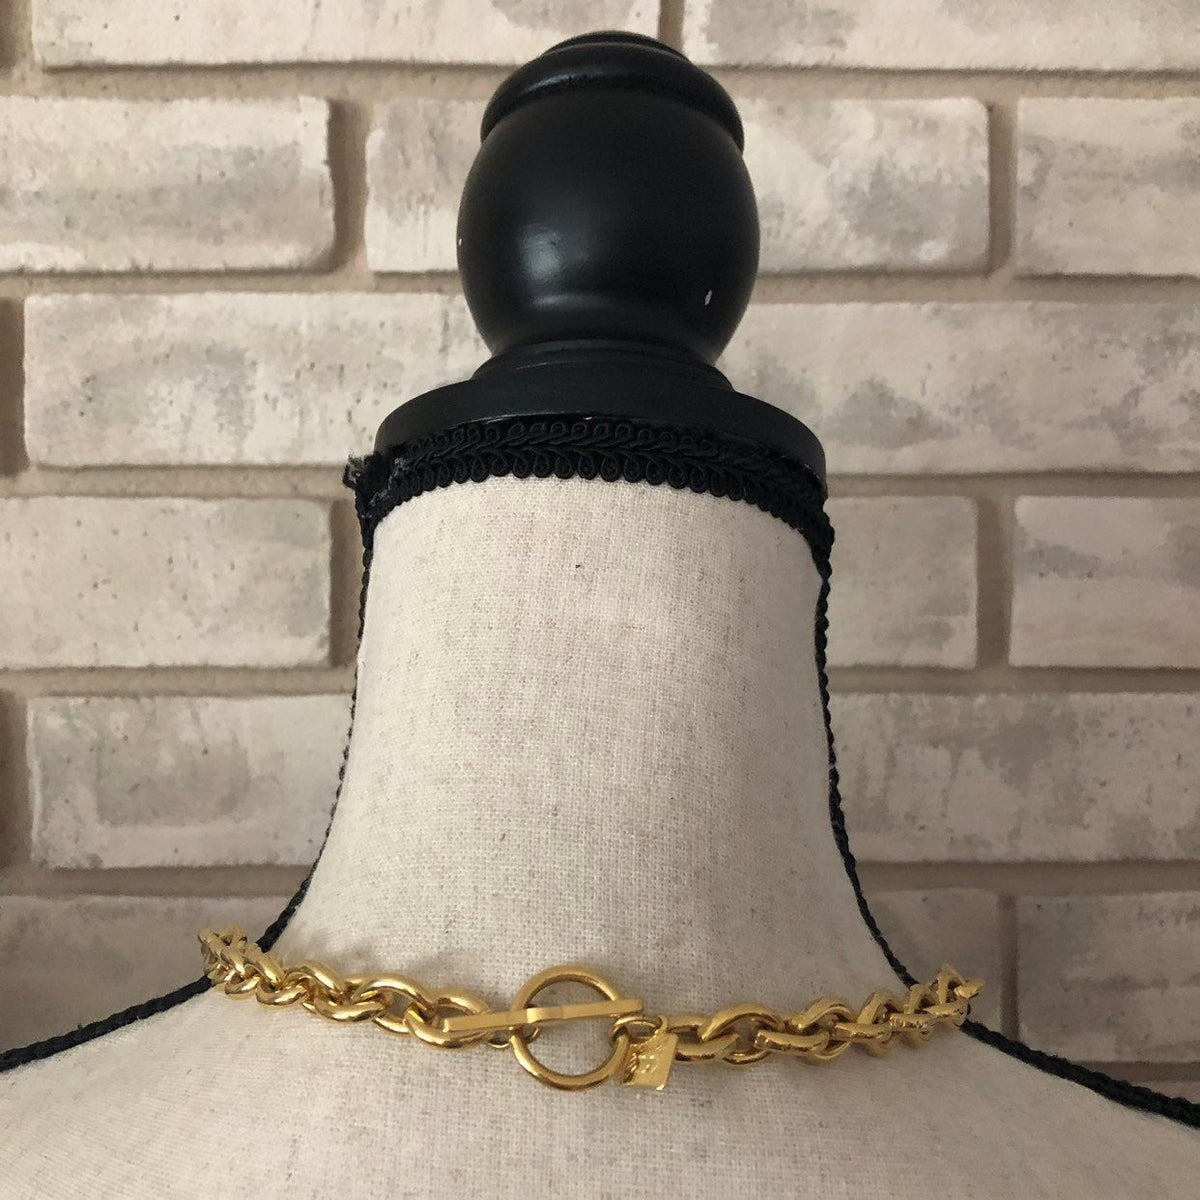 Anne Klein Classic Heavy Link Gold Chain Necklace - 24 Wishes Vintage Jewelry